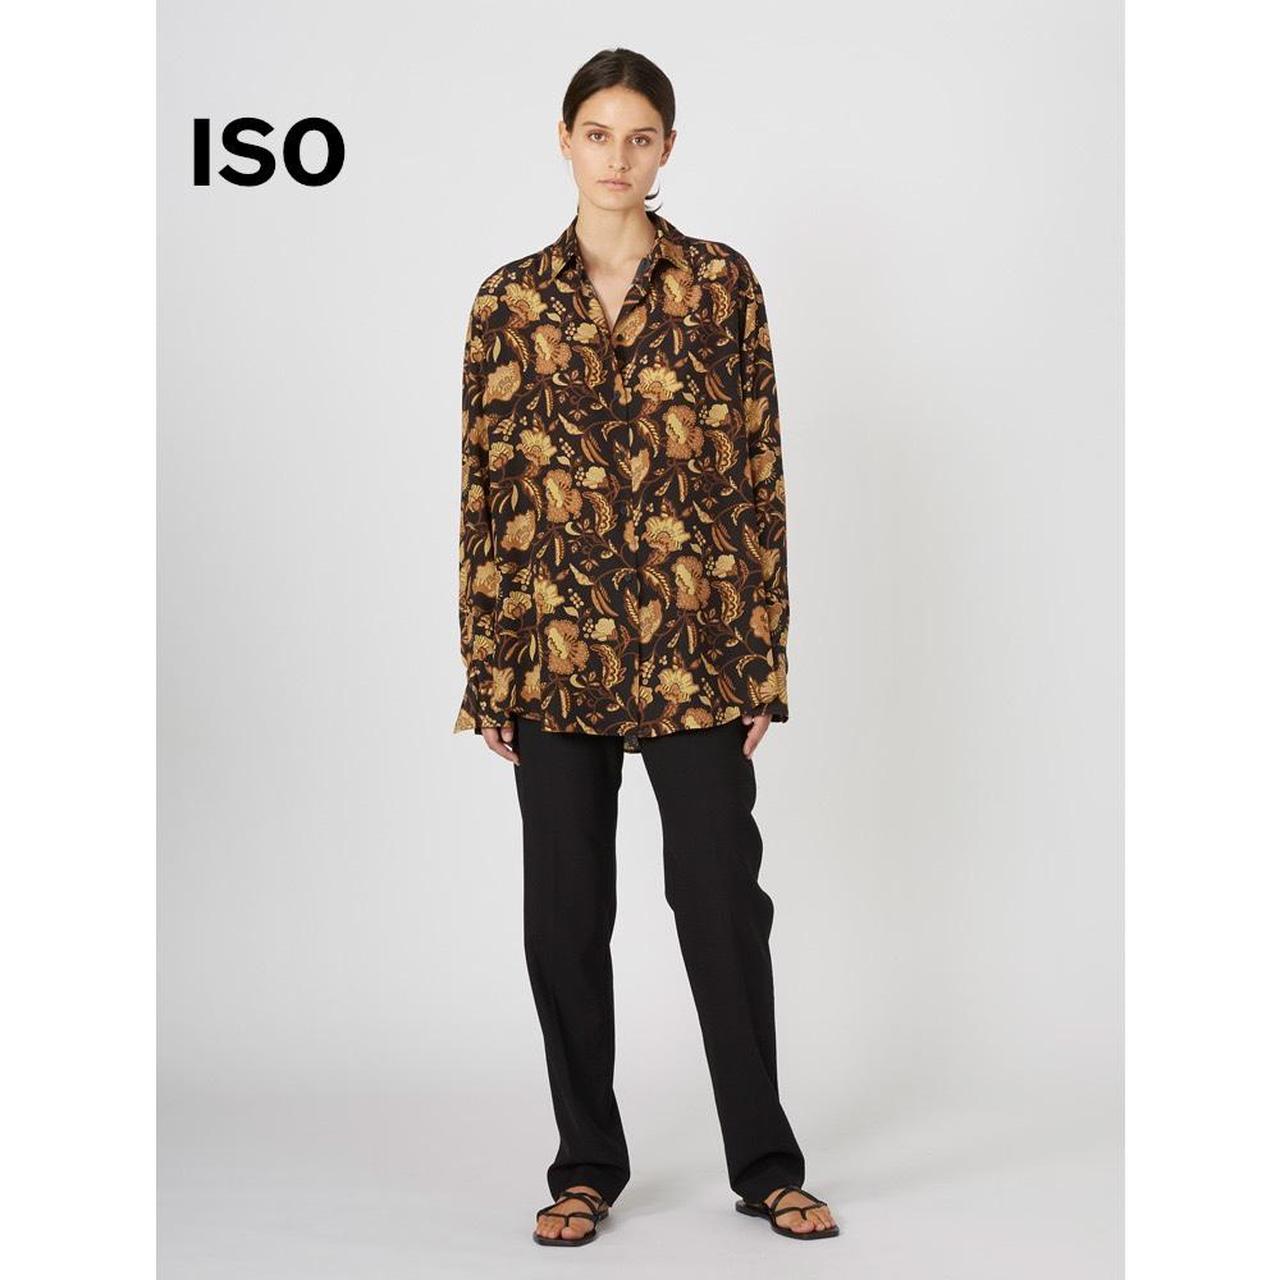 Product Image 1 - ISO DO NOT BUY

Matteau Silk